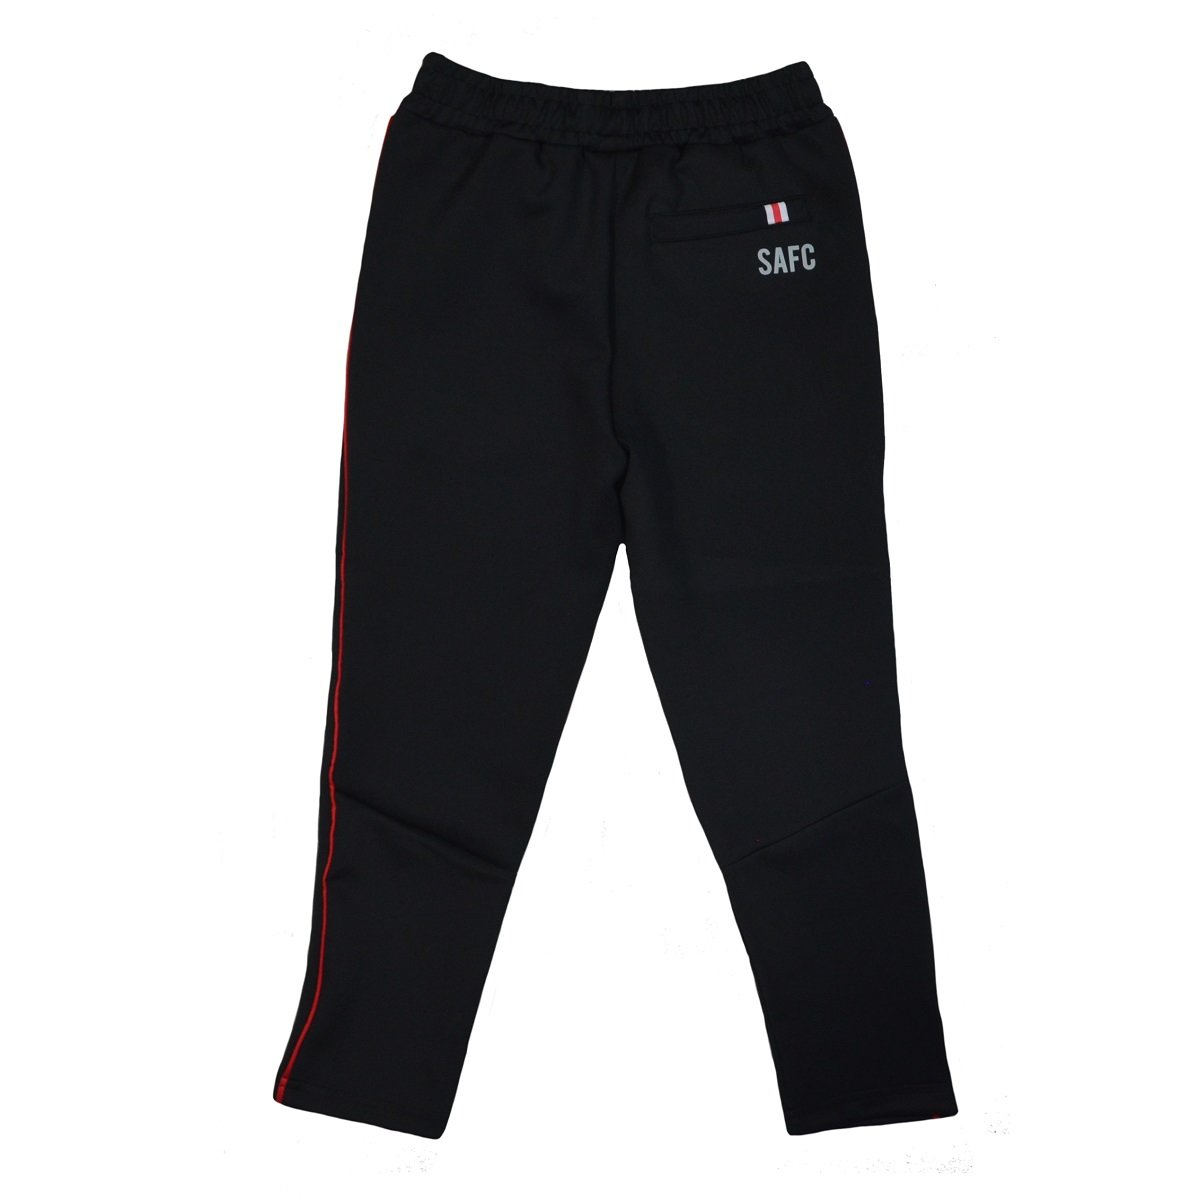 Buy the SAFC RAWA Pant online at Sunderland AFC Store